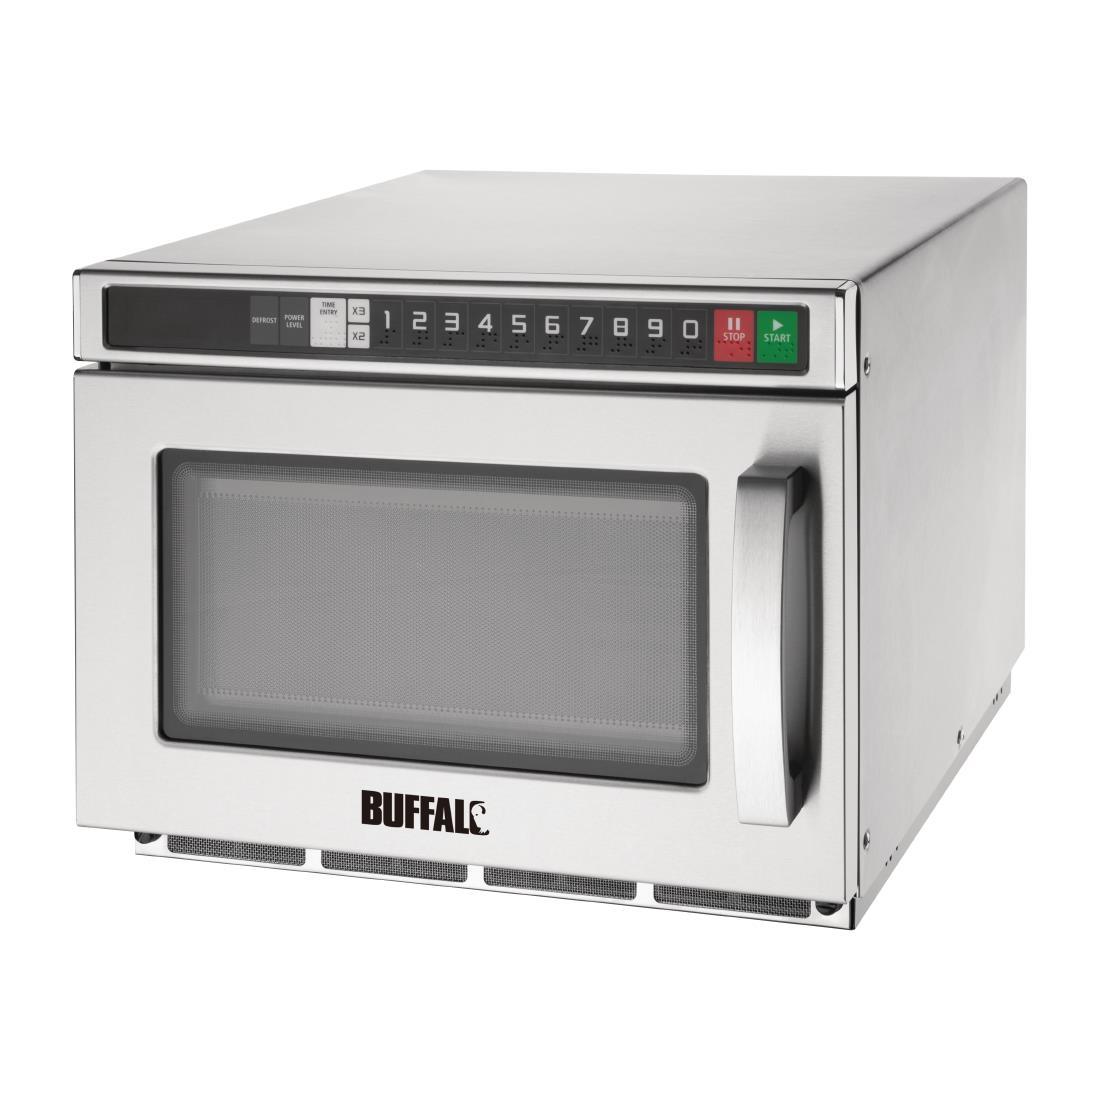 Buffalo Programmable Compact Microwave Oven 17ltr 1800W - FB865  - 2